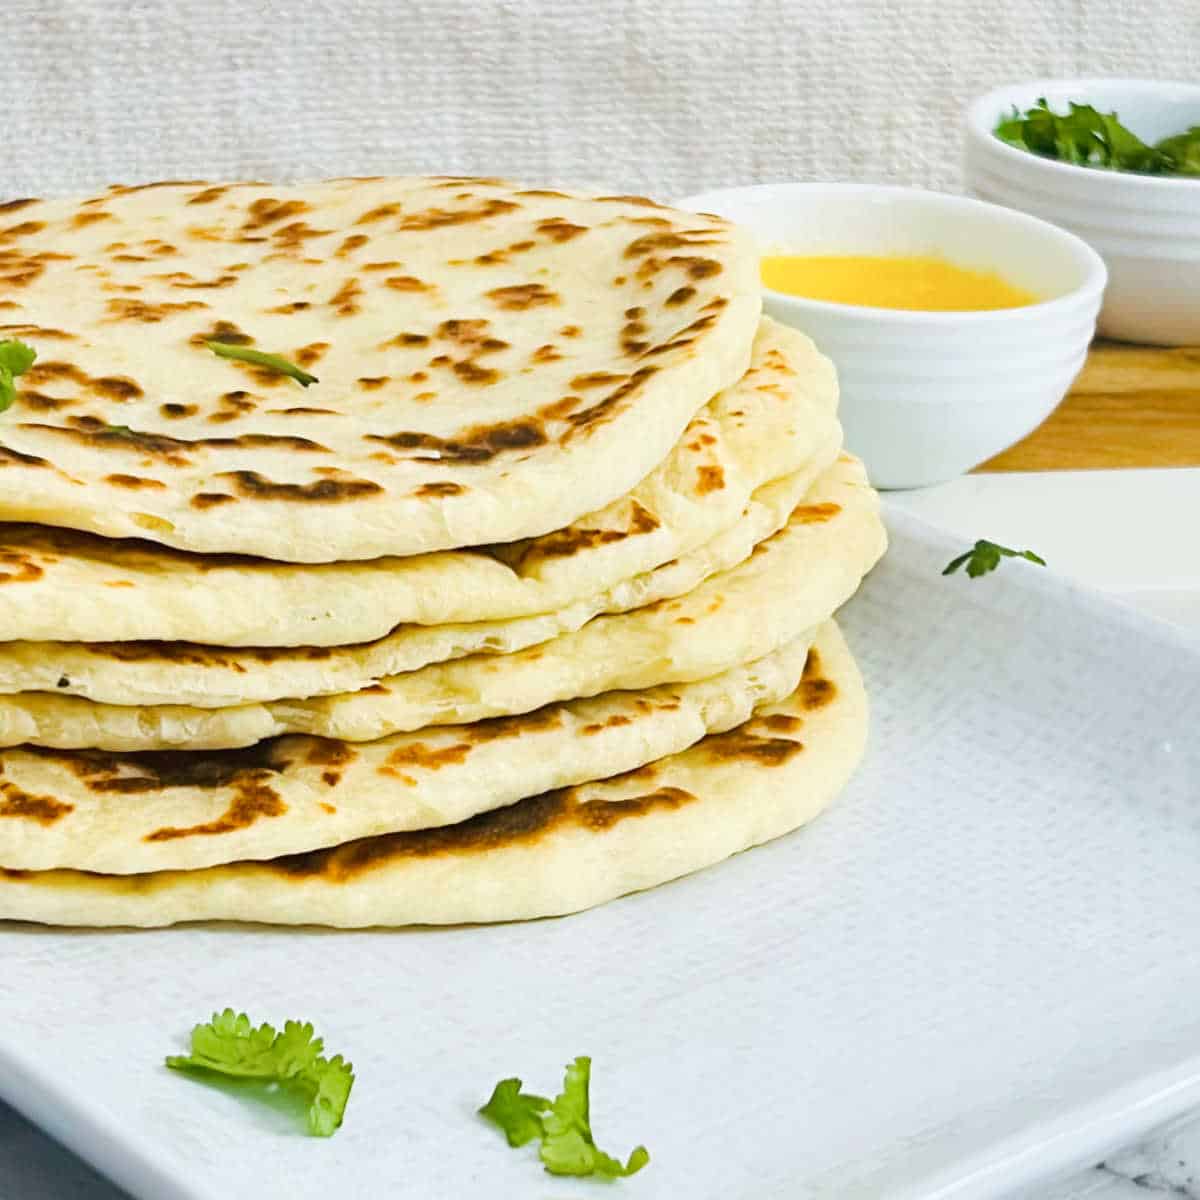 What to Serve with Naan - 15 Best Recipes